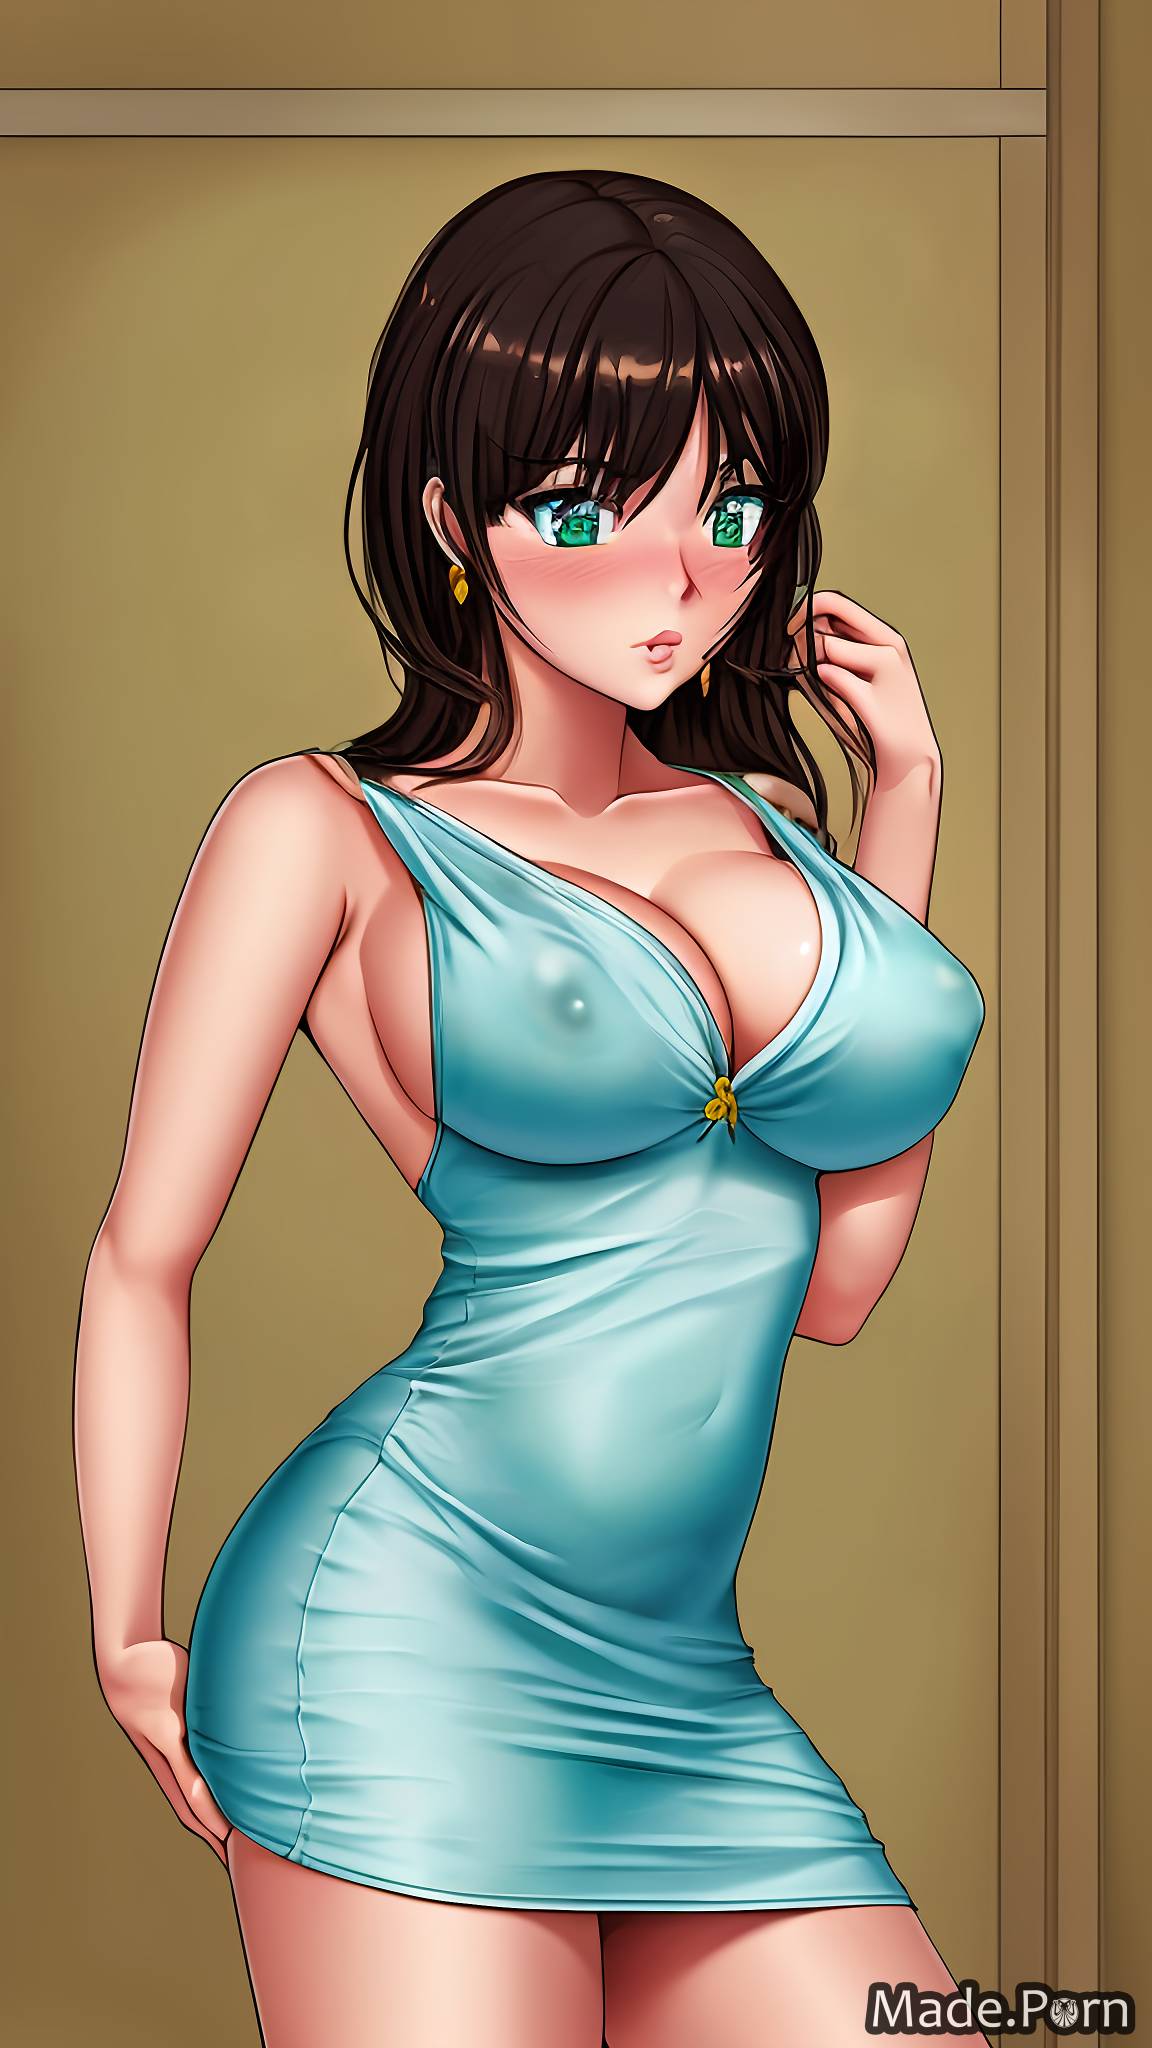 Anime Shemale Big Penis - Porn image of dress big cock transparent shemale cleavage fairer skin  pastel created by AI